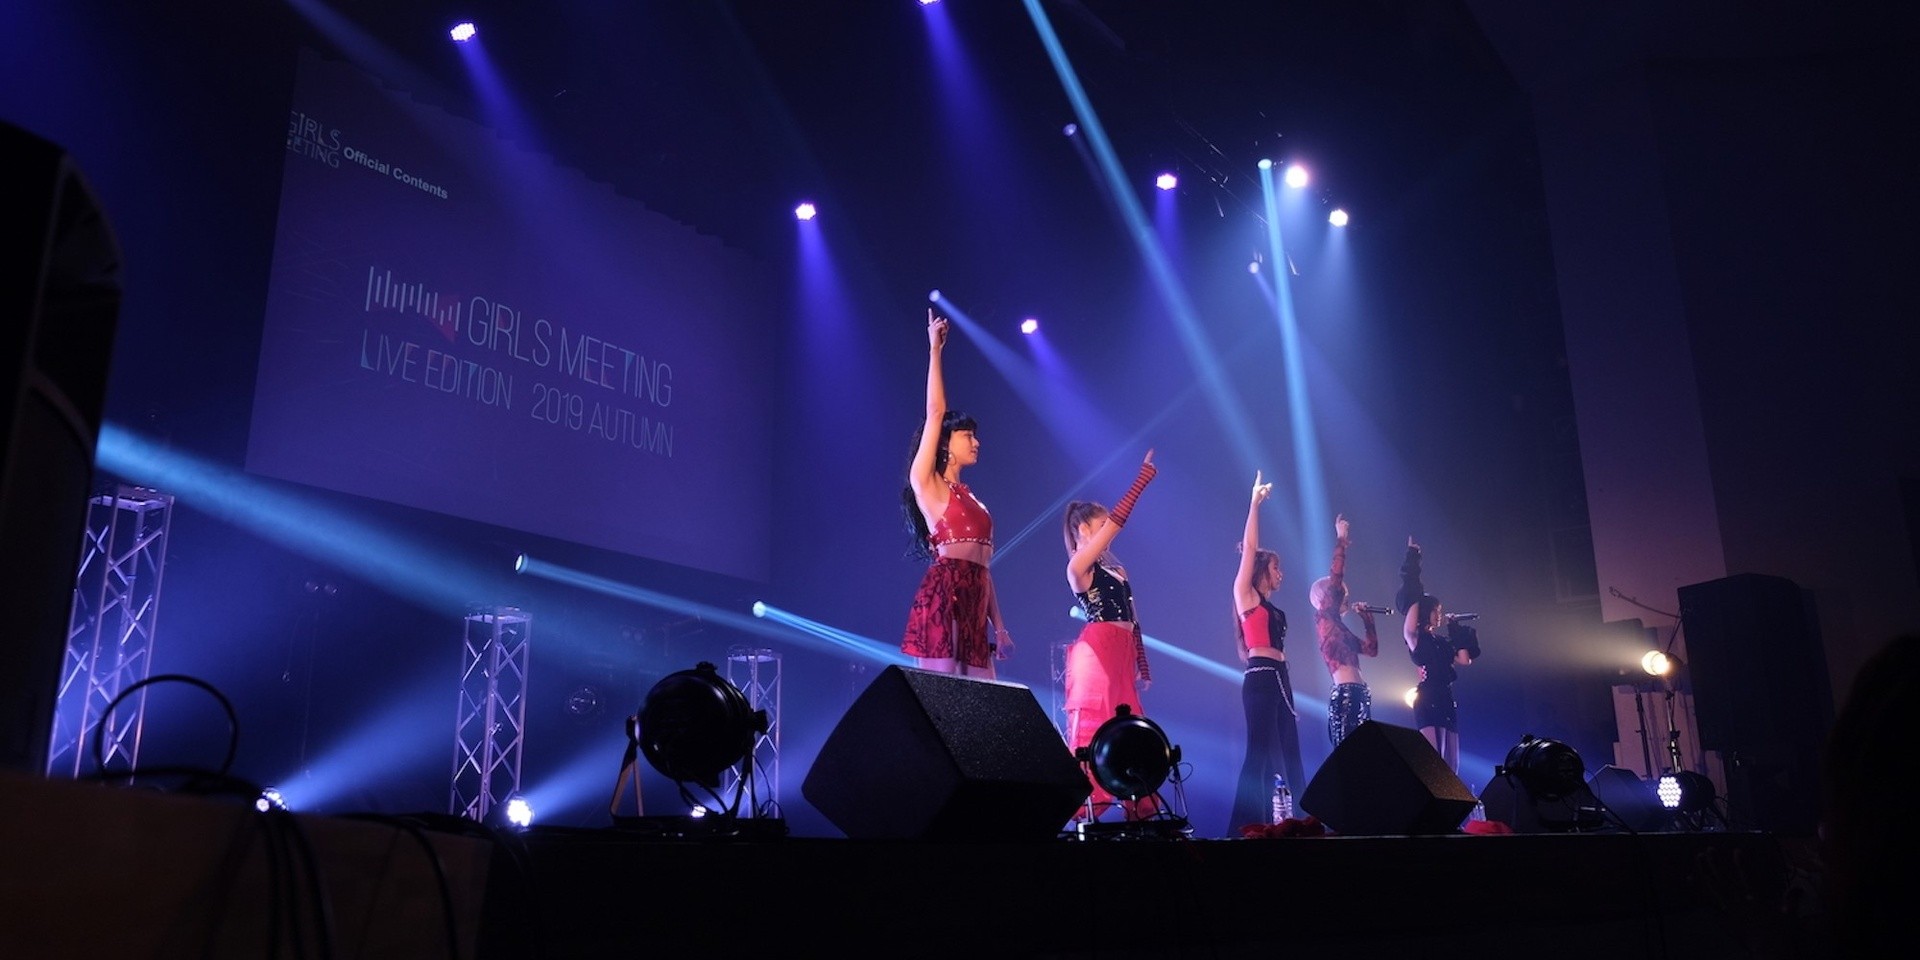 Avex Entertainment on the future of J-pop and what fans can expect from its new AEGX initiative 
